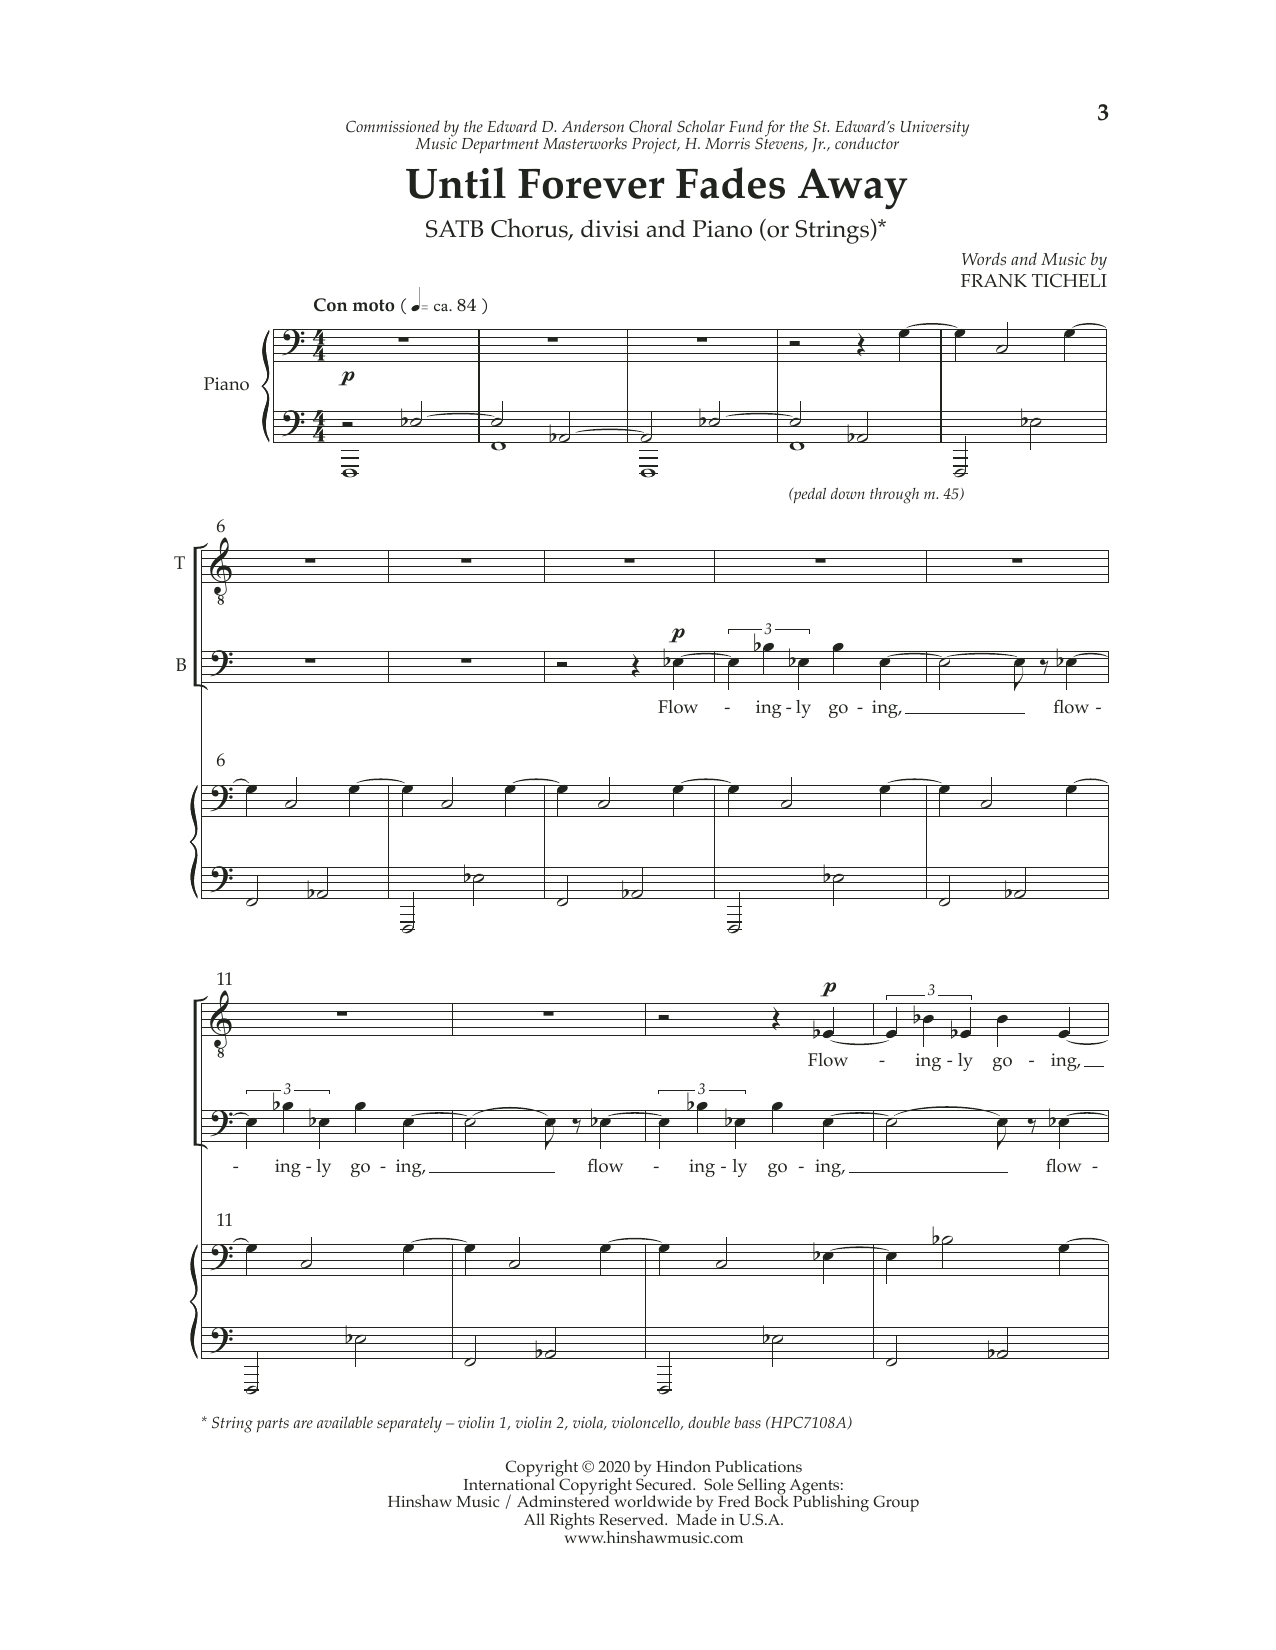 Download Frank Ticheli Until Forever Fades Away sheet music and printable PDF score & Concert music notes